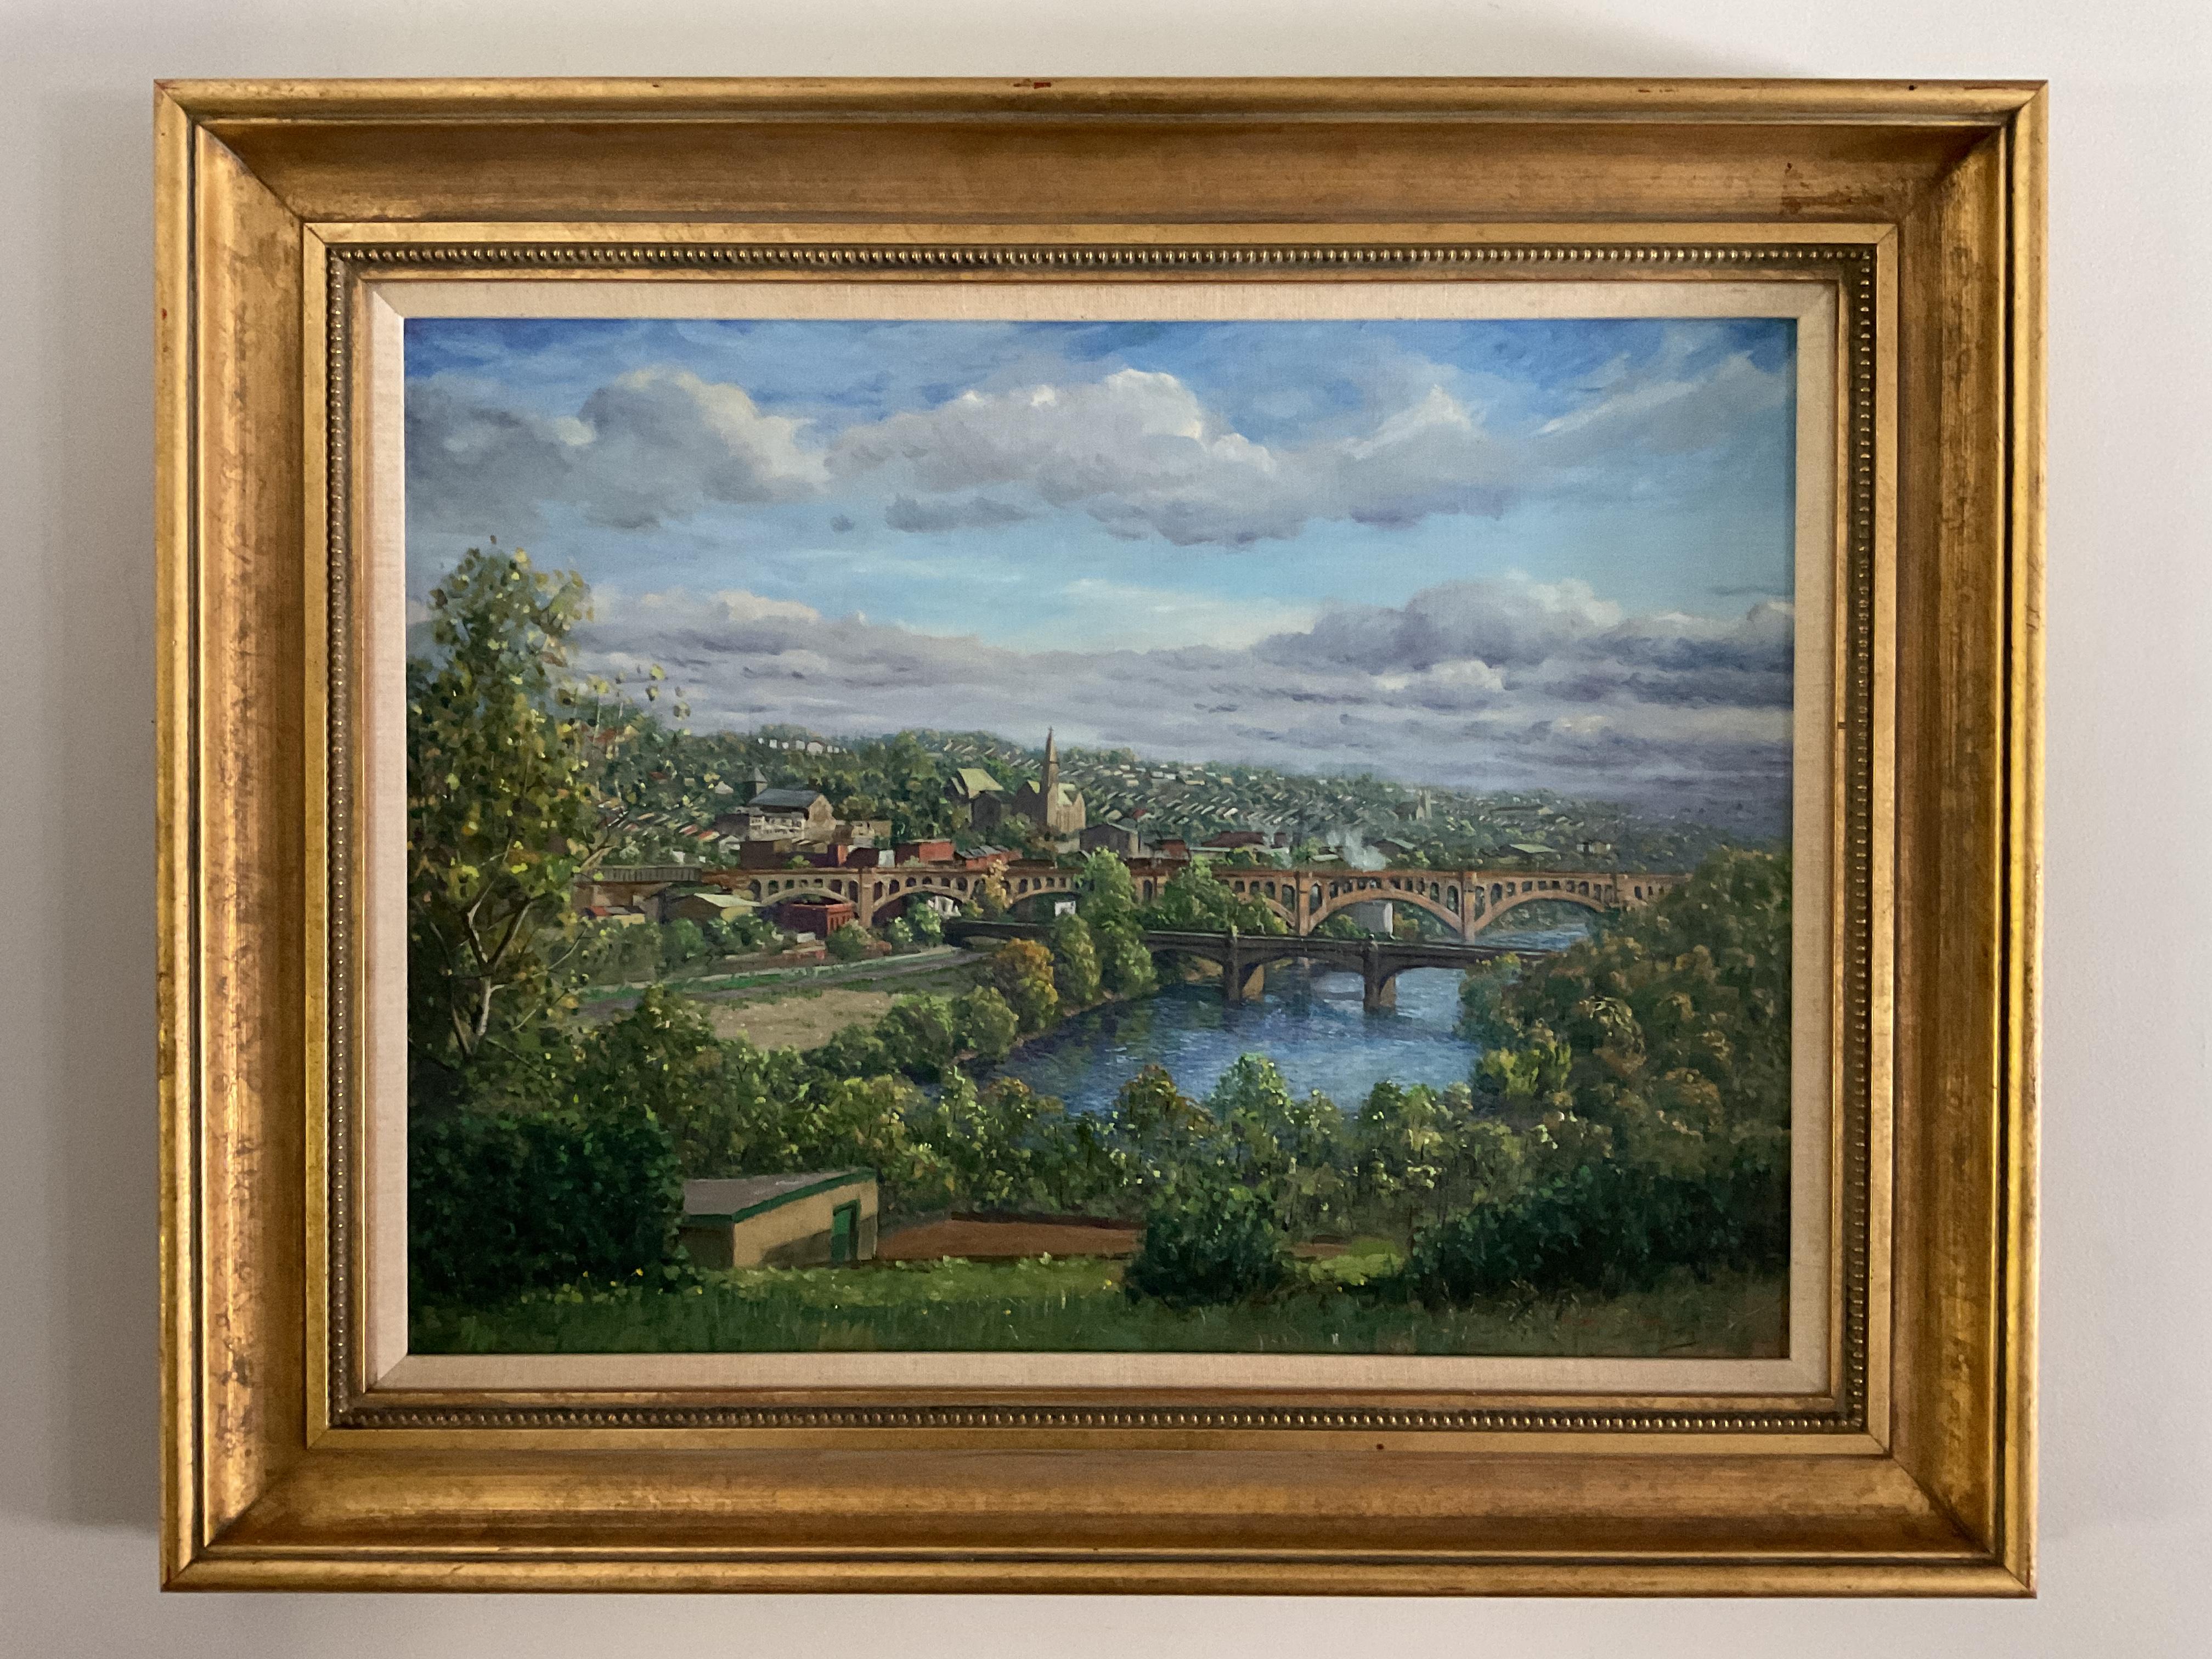 Richard Sanders Chew Landscape Painting - Schuykill River Valley, Philadelphia Painting by listed artist Richard S. Chew